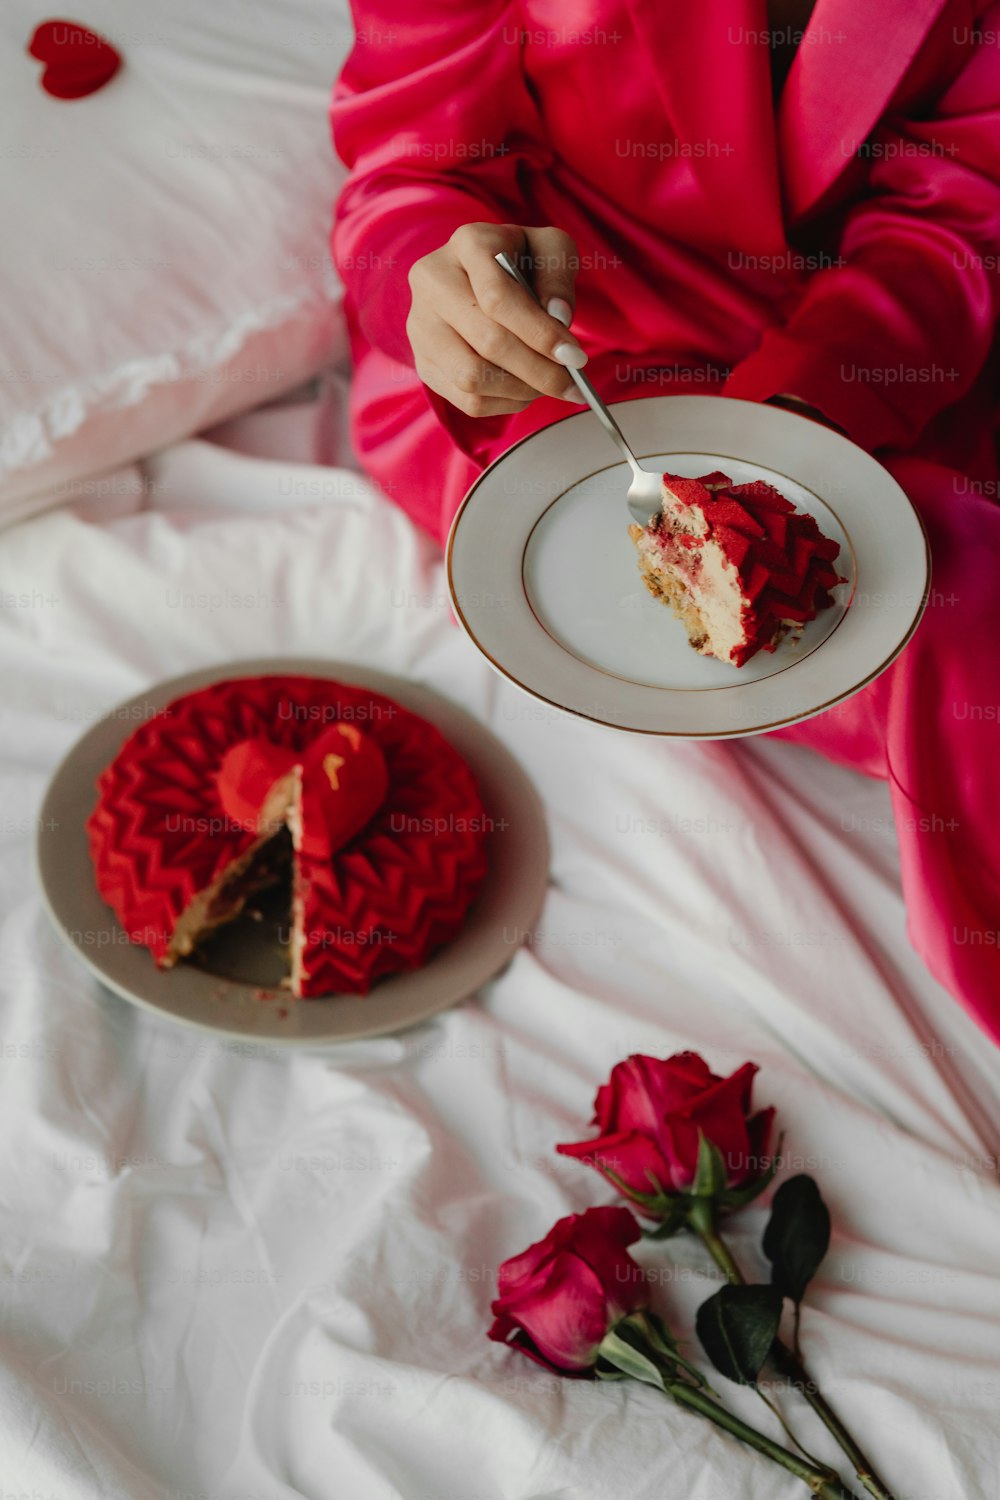 a woman in a red robe is eating a piece of cake